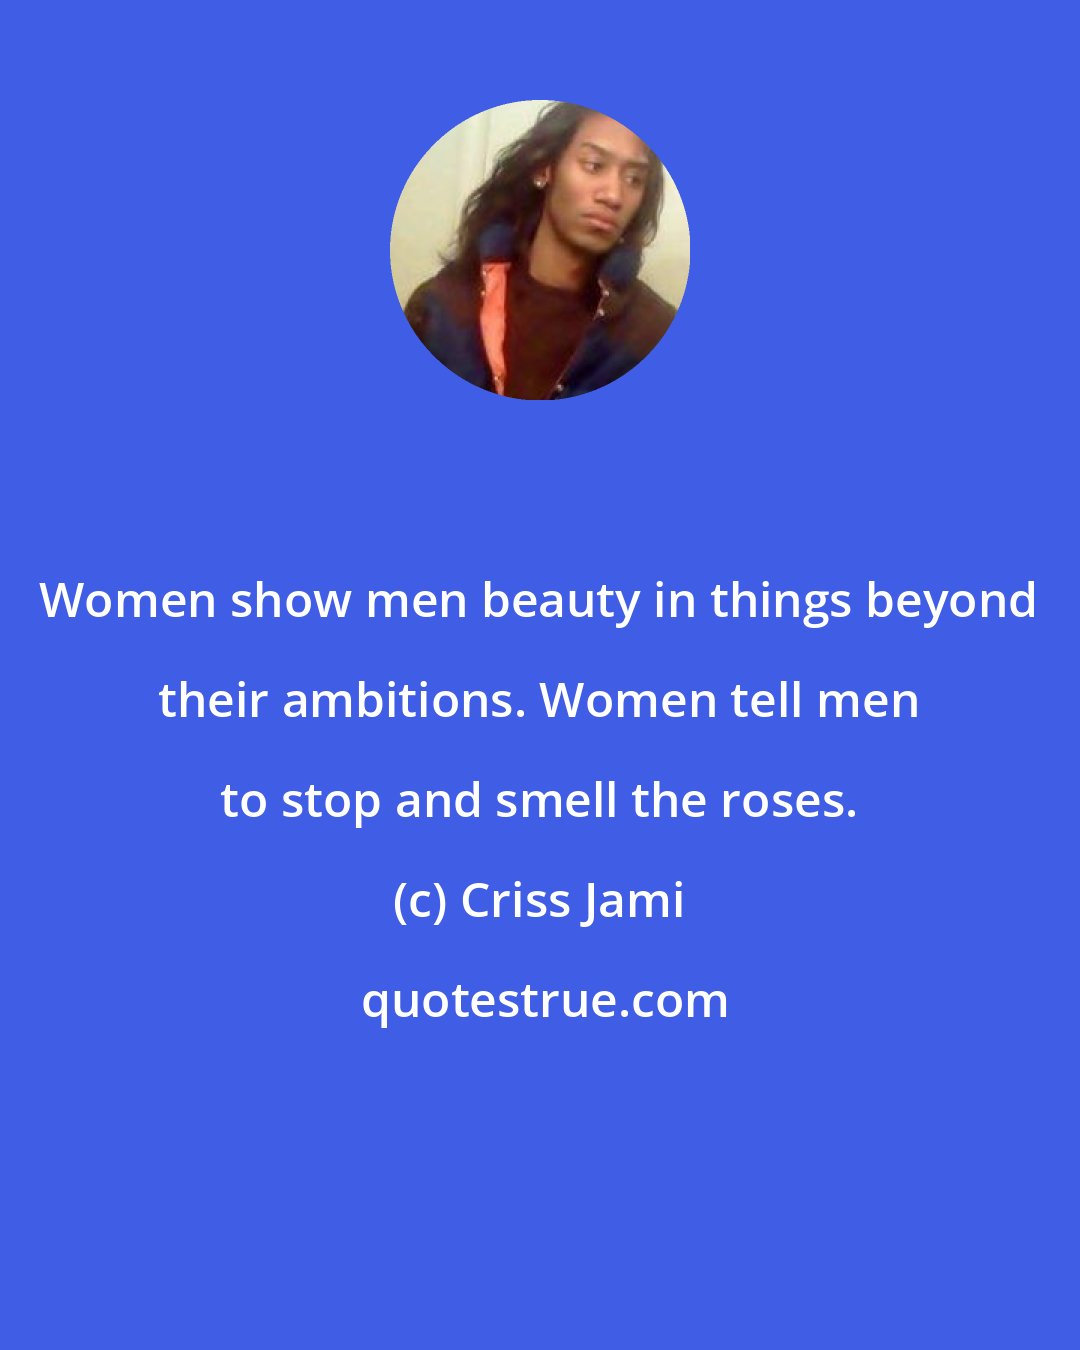 Criss Jami: Women show men beauty in things beyond their ambitions. Women tell men to stop and smell the roses.